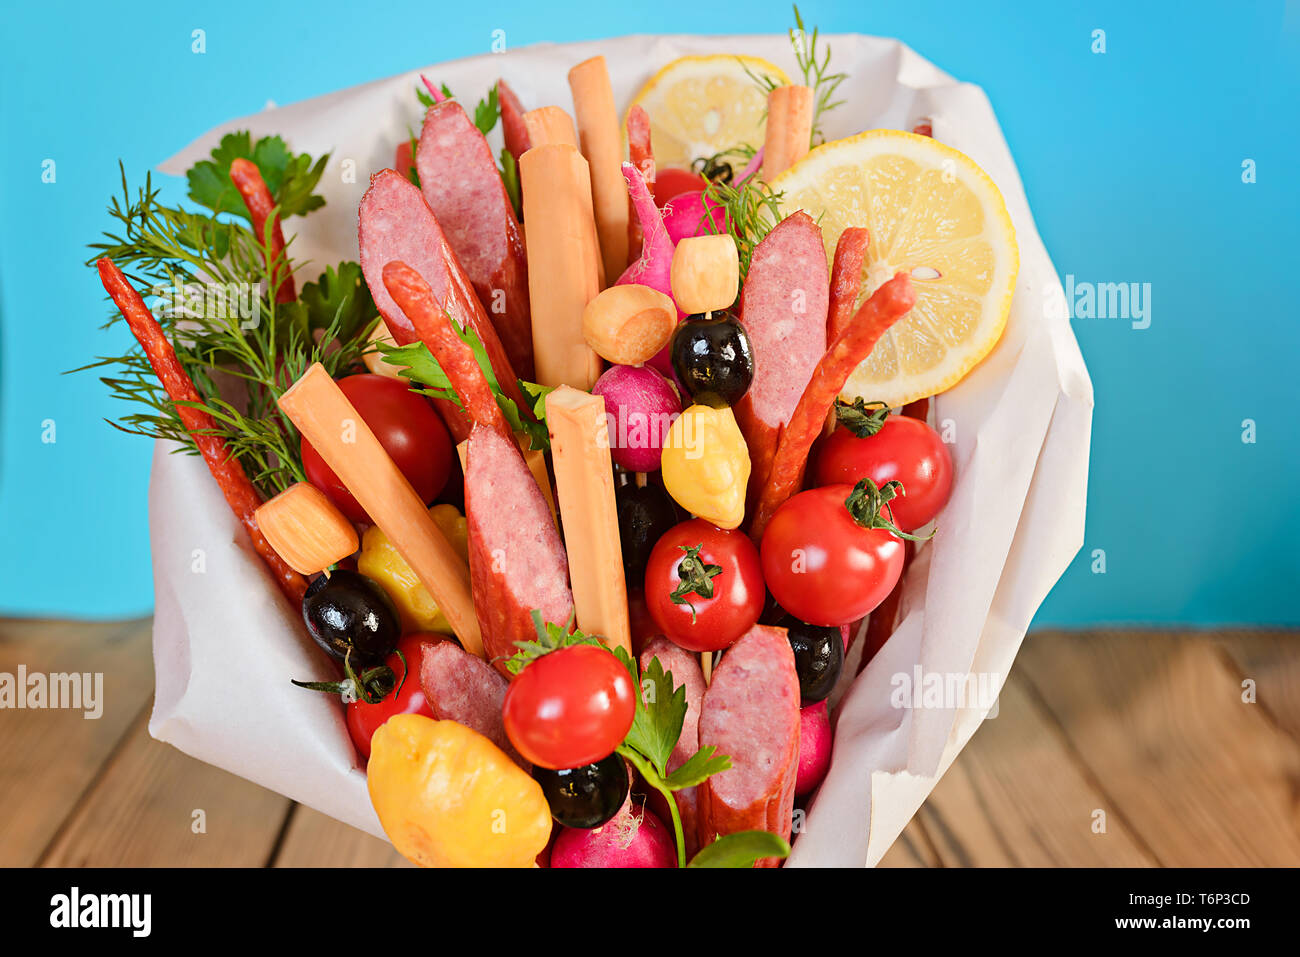 Smoked sausage, cheese, vegetables and greens, collected in a bouquet. Option gift man. On blue background. Stock Photo